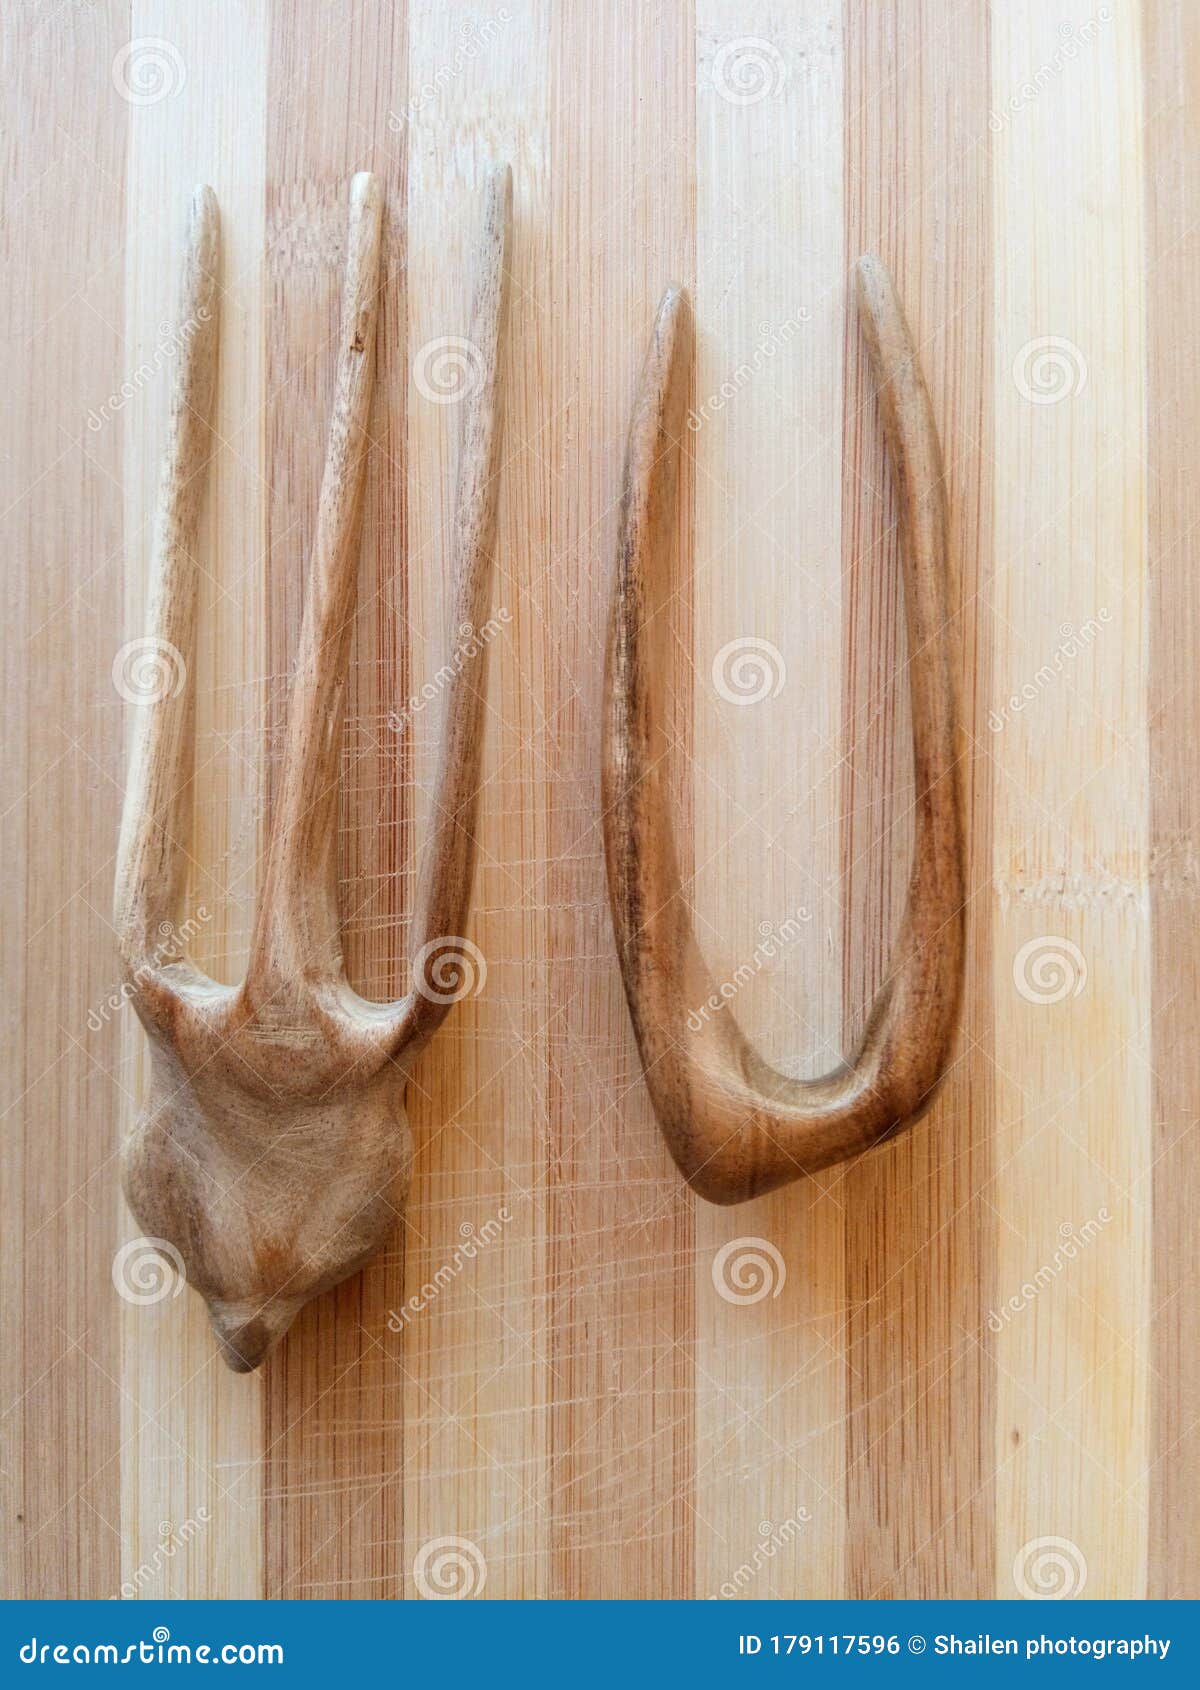 Whittling wood craft stock photo. Image of material - 179117596